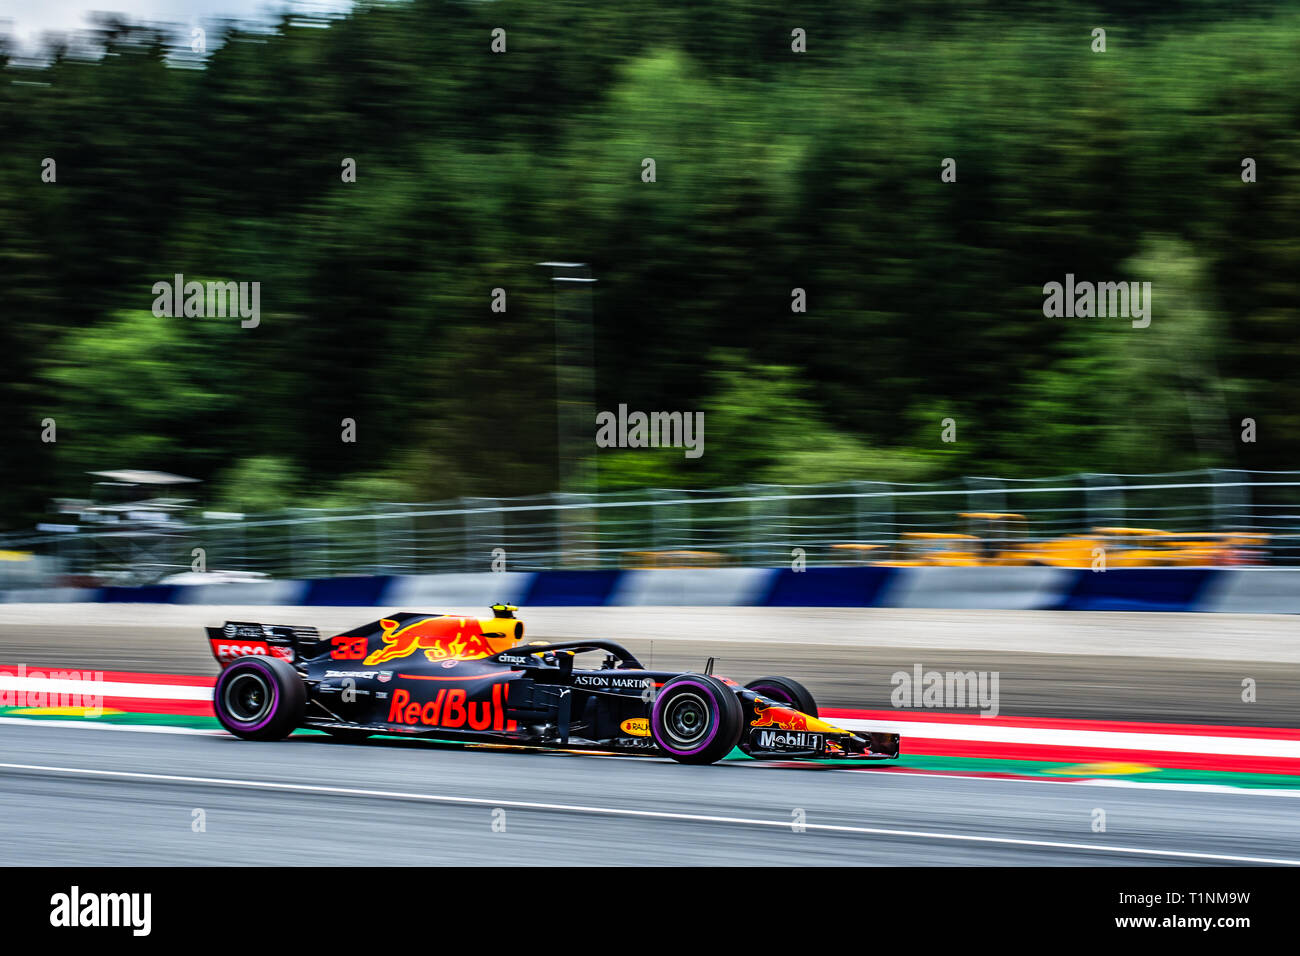 Spielberg/Austria - 06/29/2018 - #33 Max VERSTAPPEN (NDL) in his Red Bull Racing RB14 during FP2 at the Red Bull Ring ahead of the 2018 Austrian Grand Stock Photo